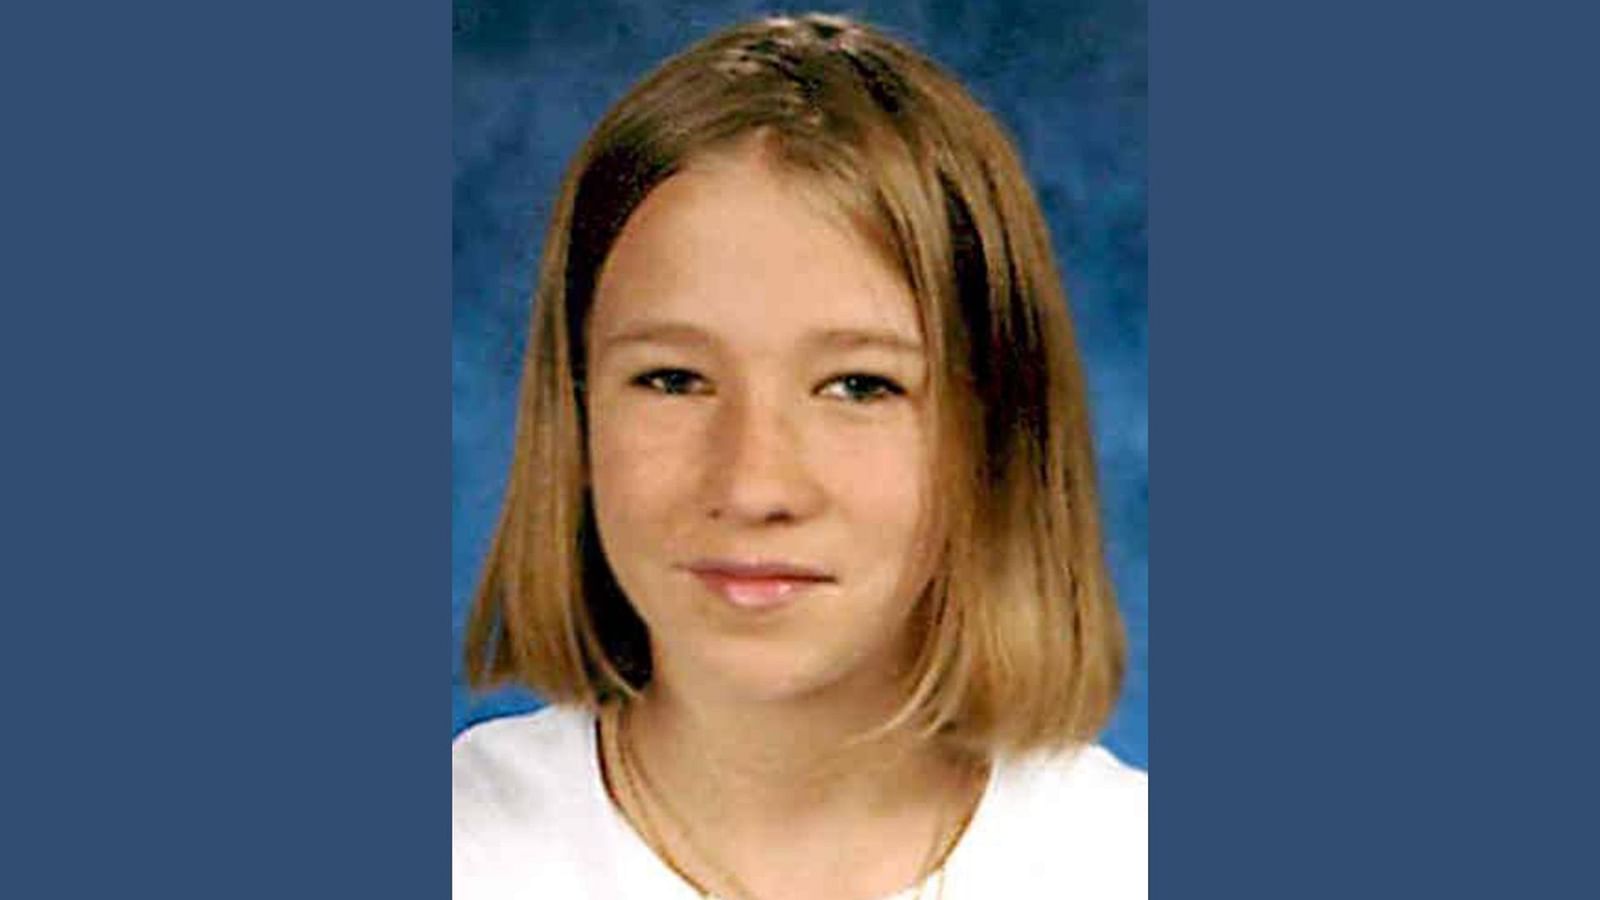 Tabitha Tuders disappearance 5 details you should know